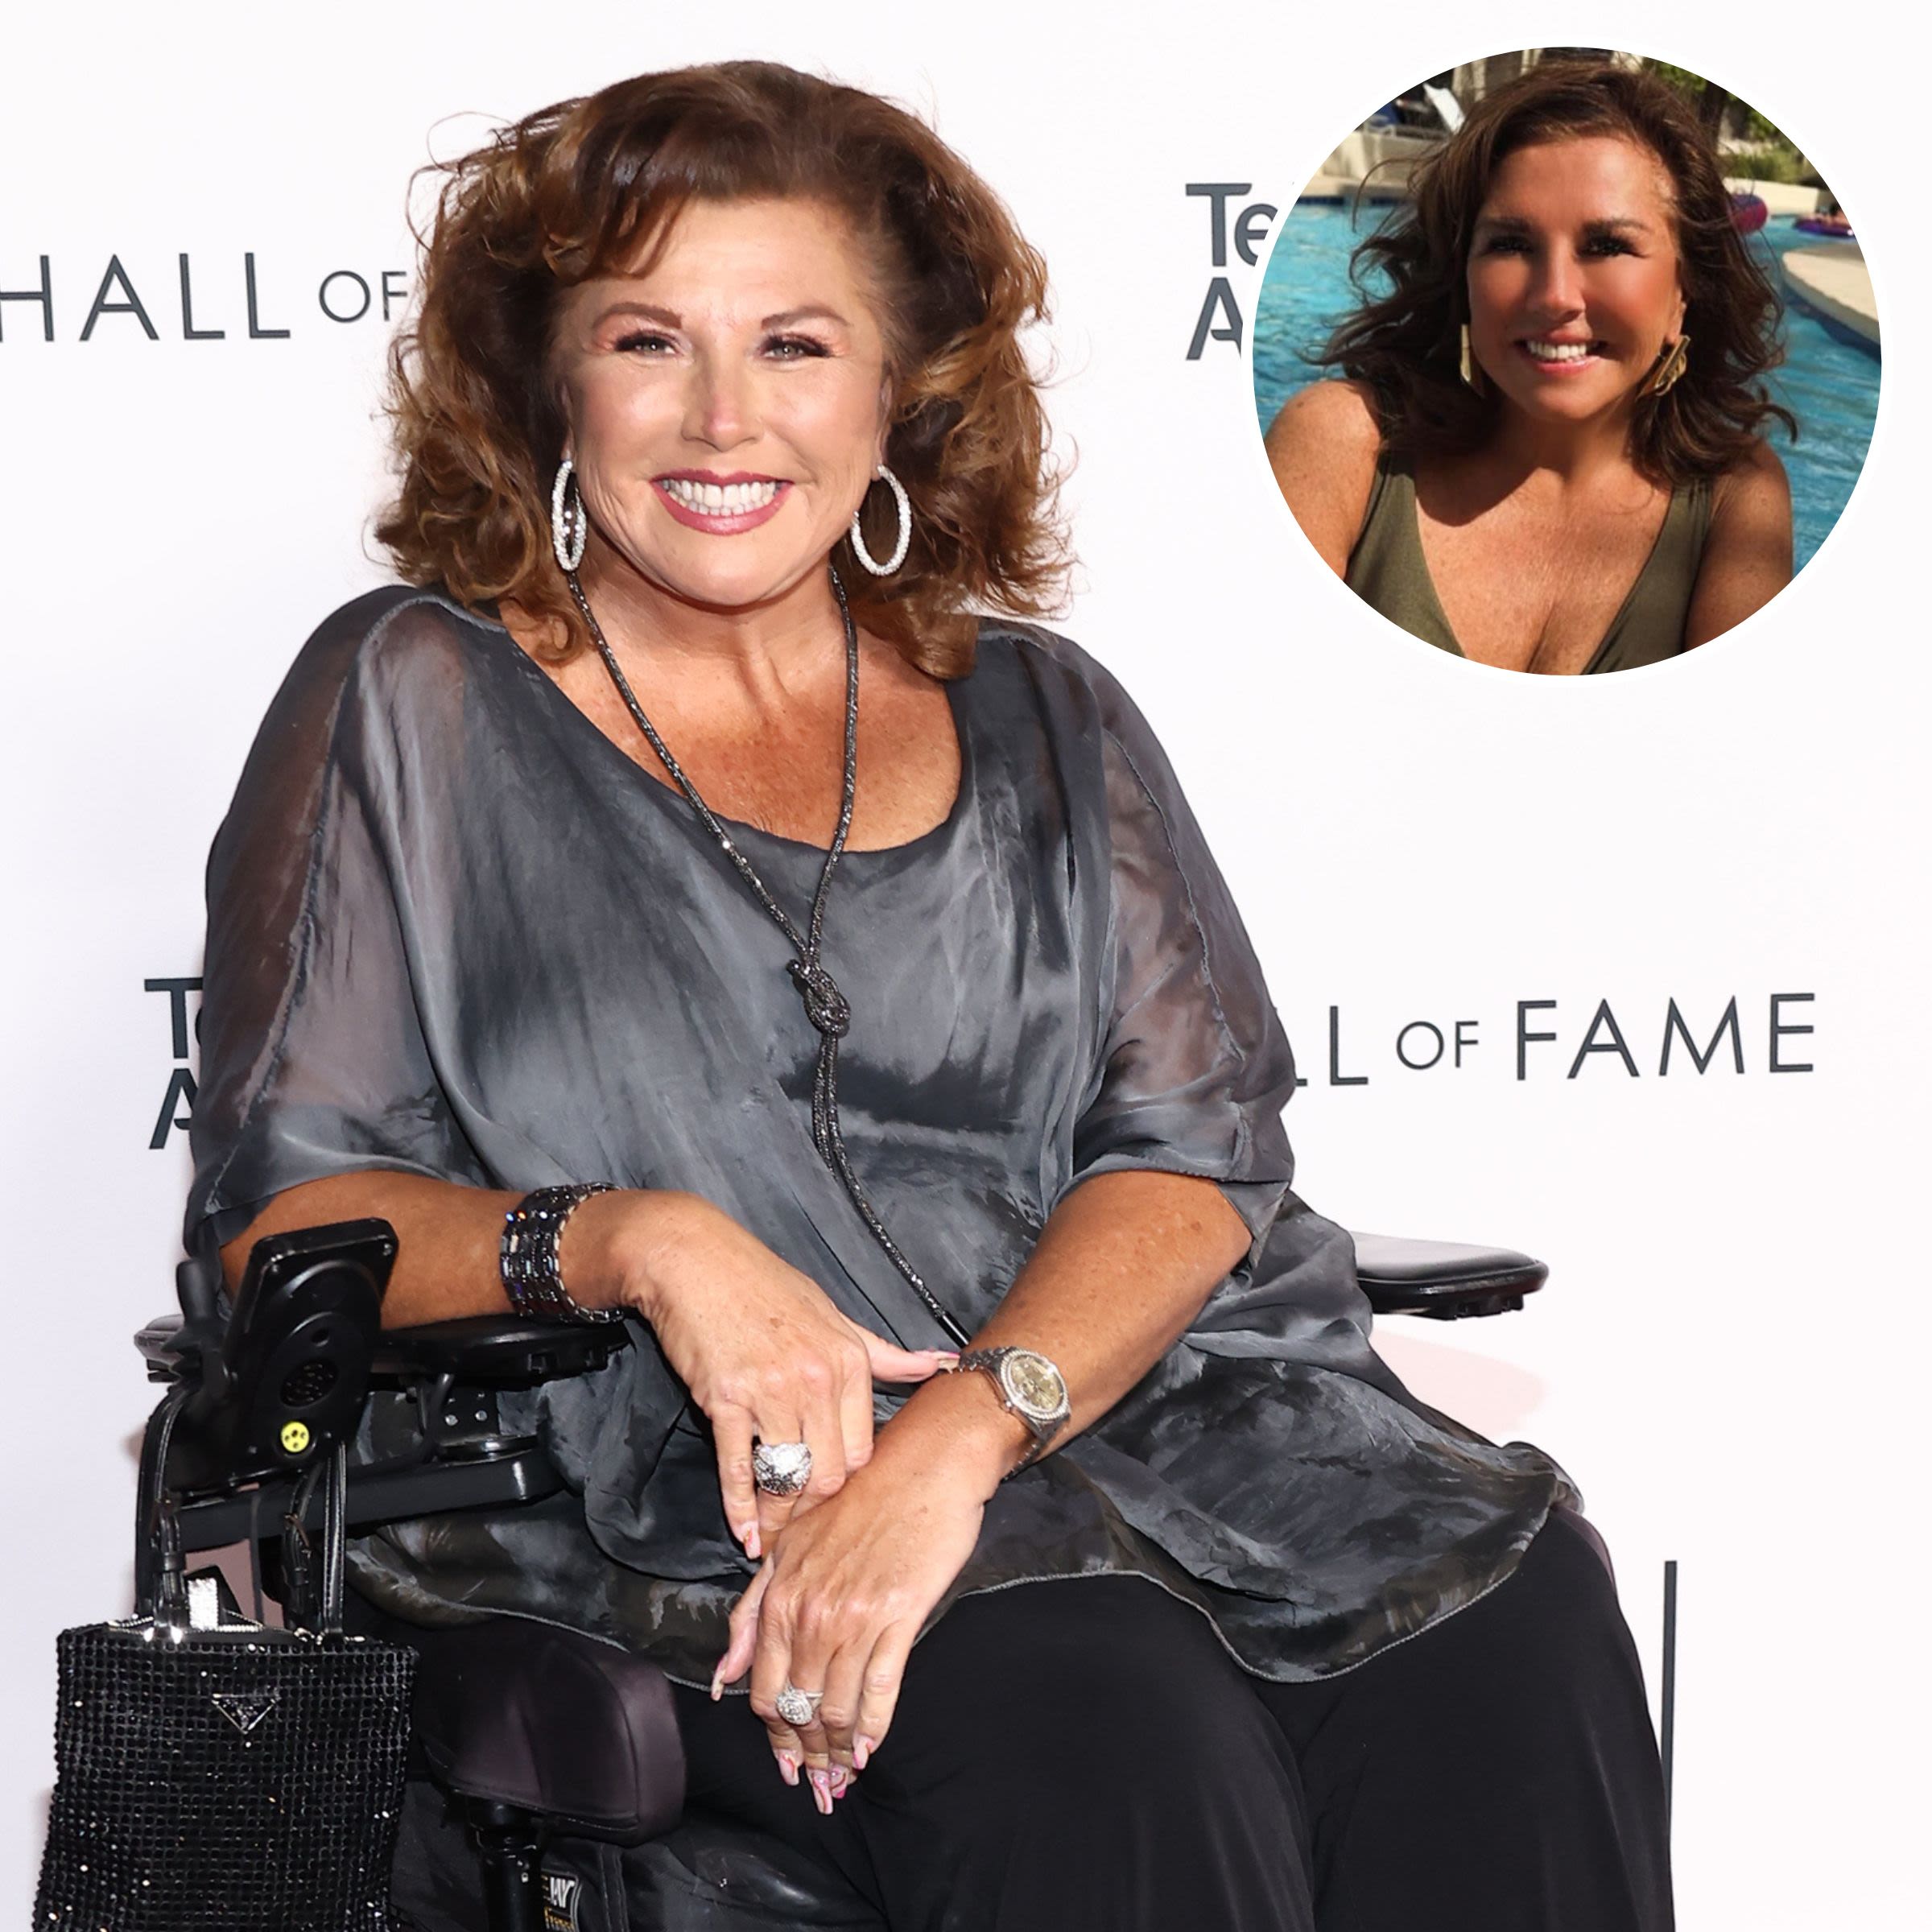 Abby Lee Miller Reacts to Fans Accusing Her of Photoshopping Bikini Photo: ‘No Time for That’